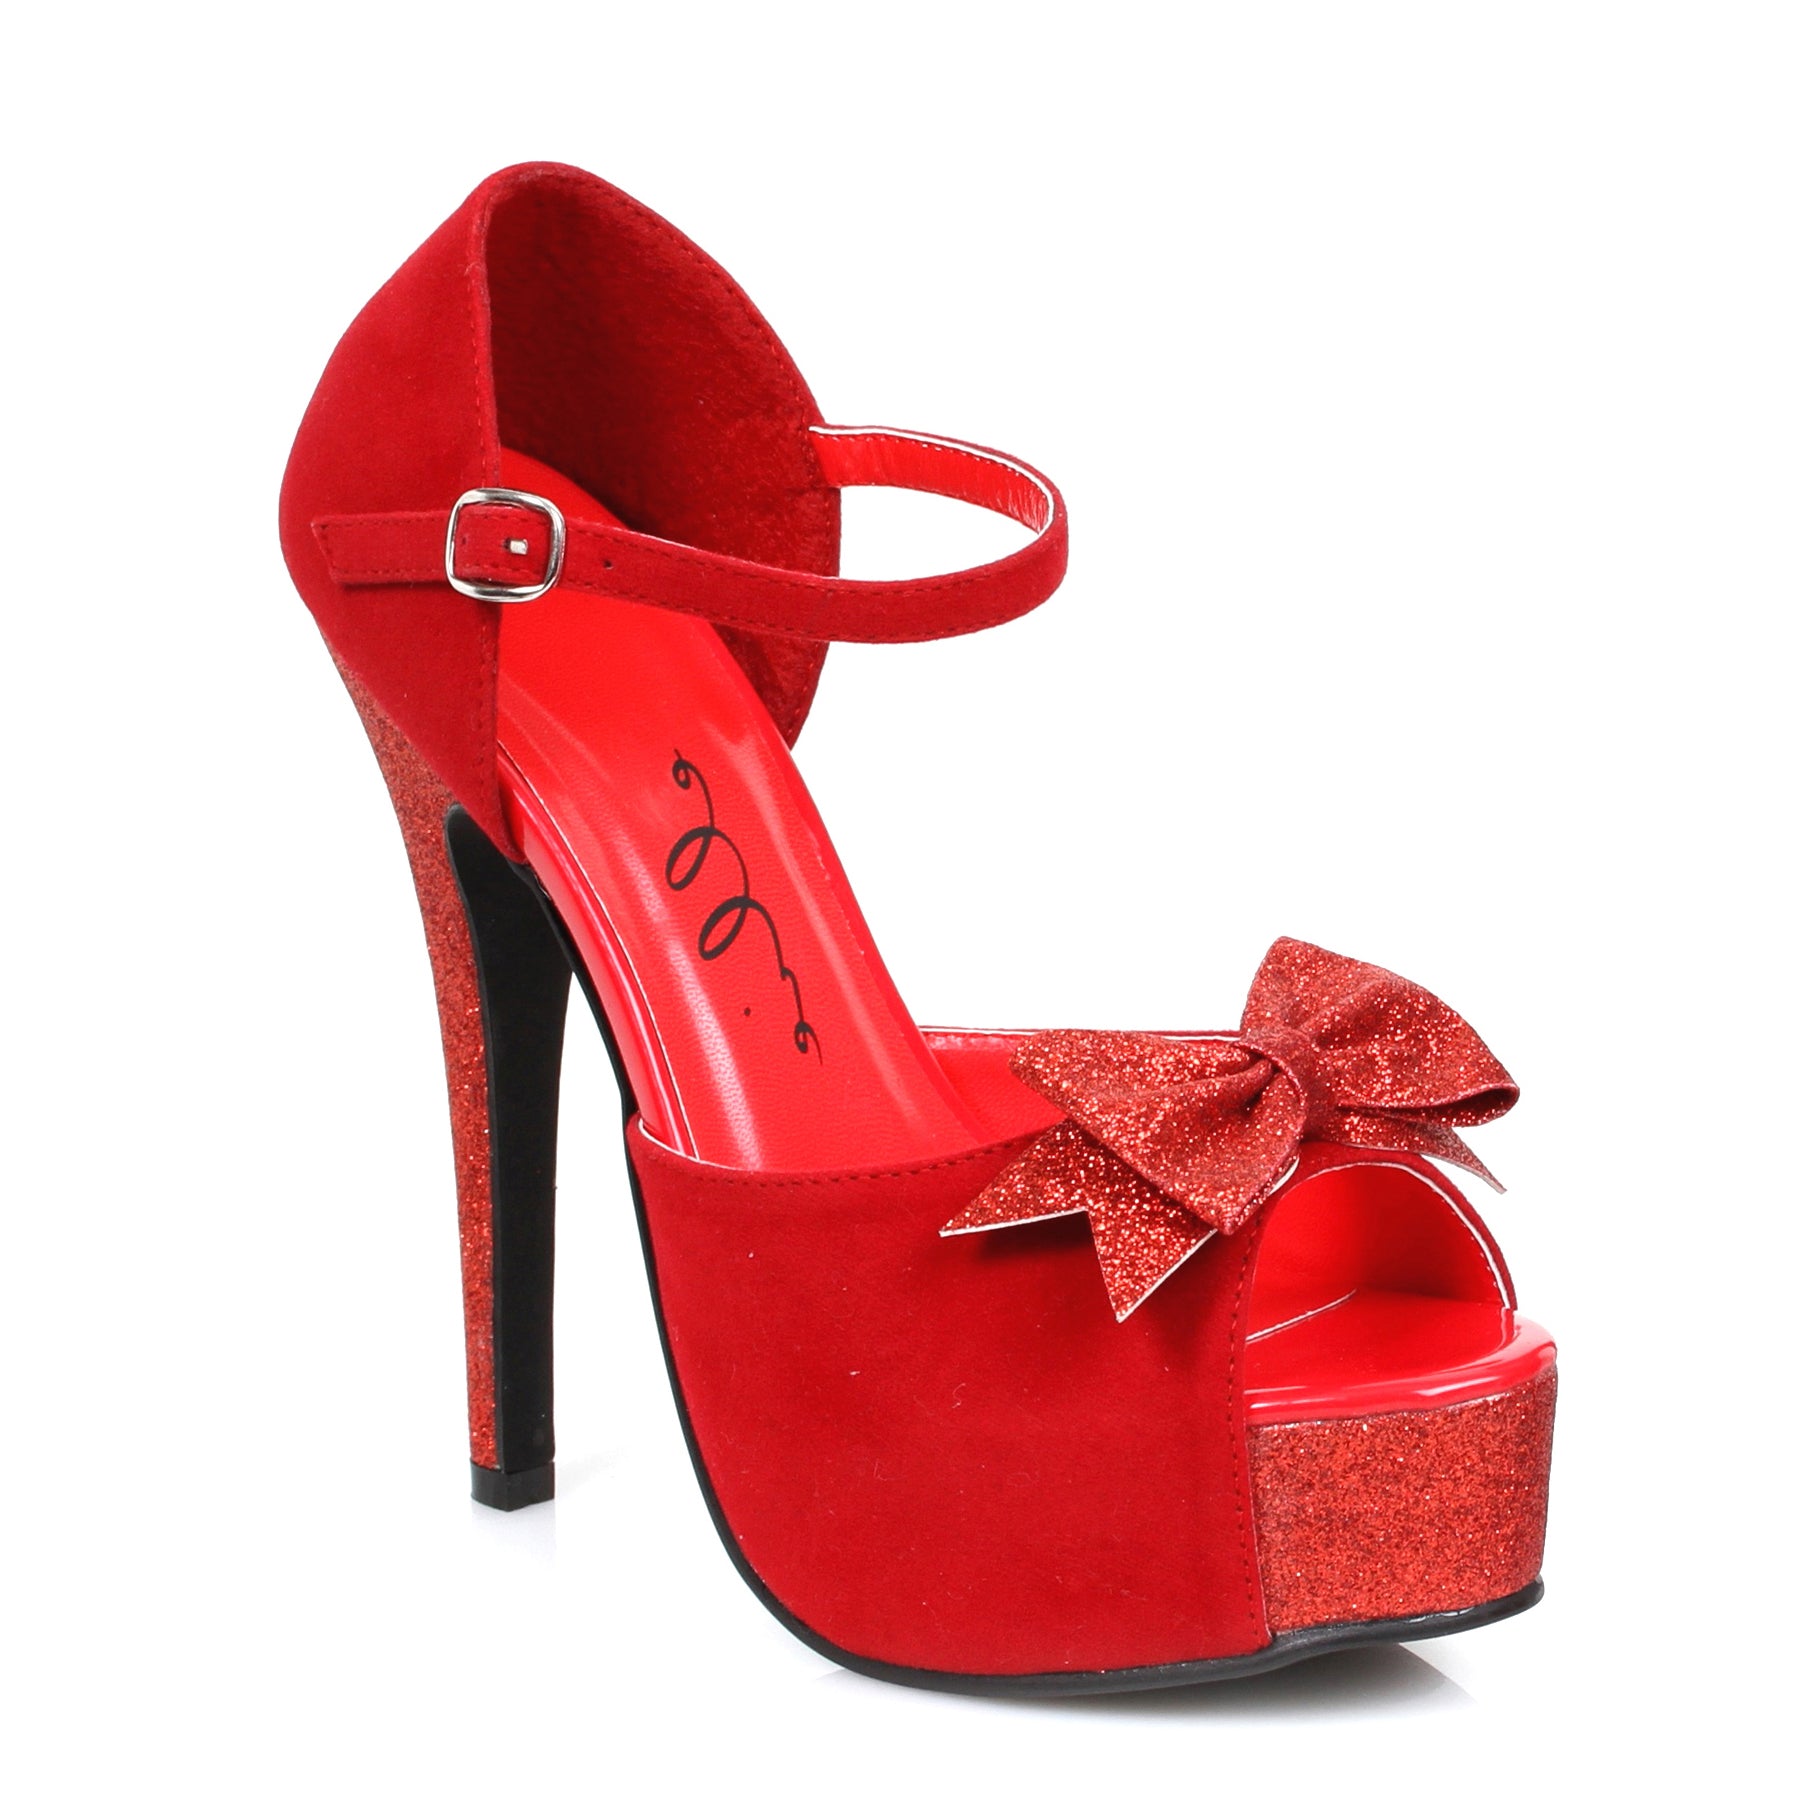 5 Heel Sandal With Bow